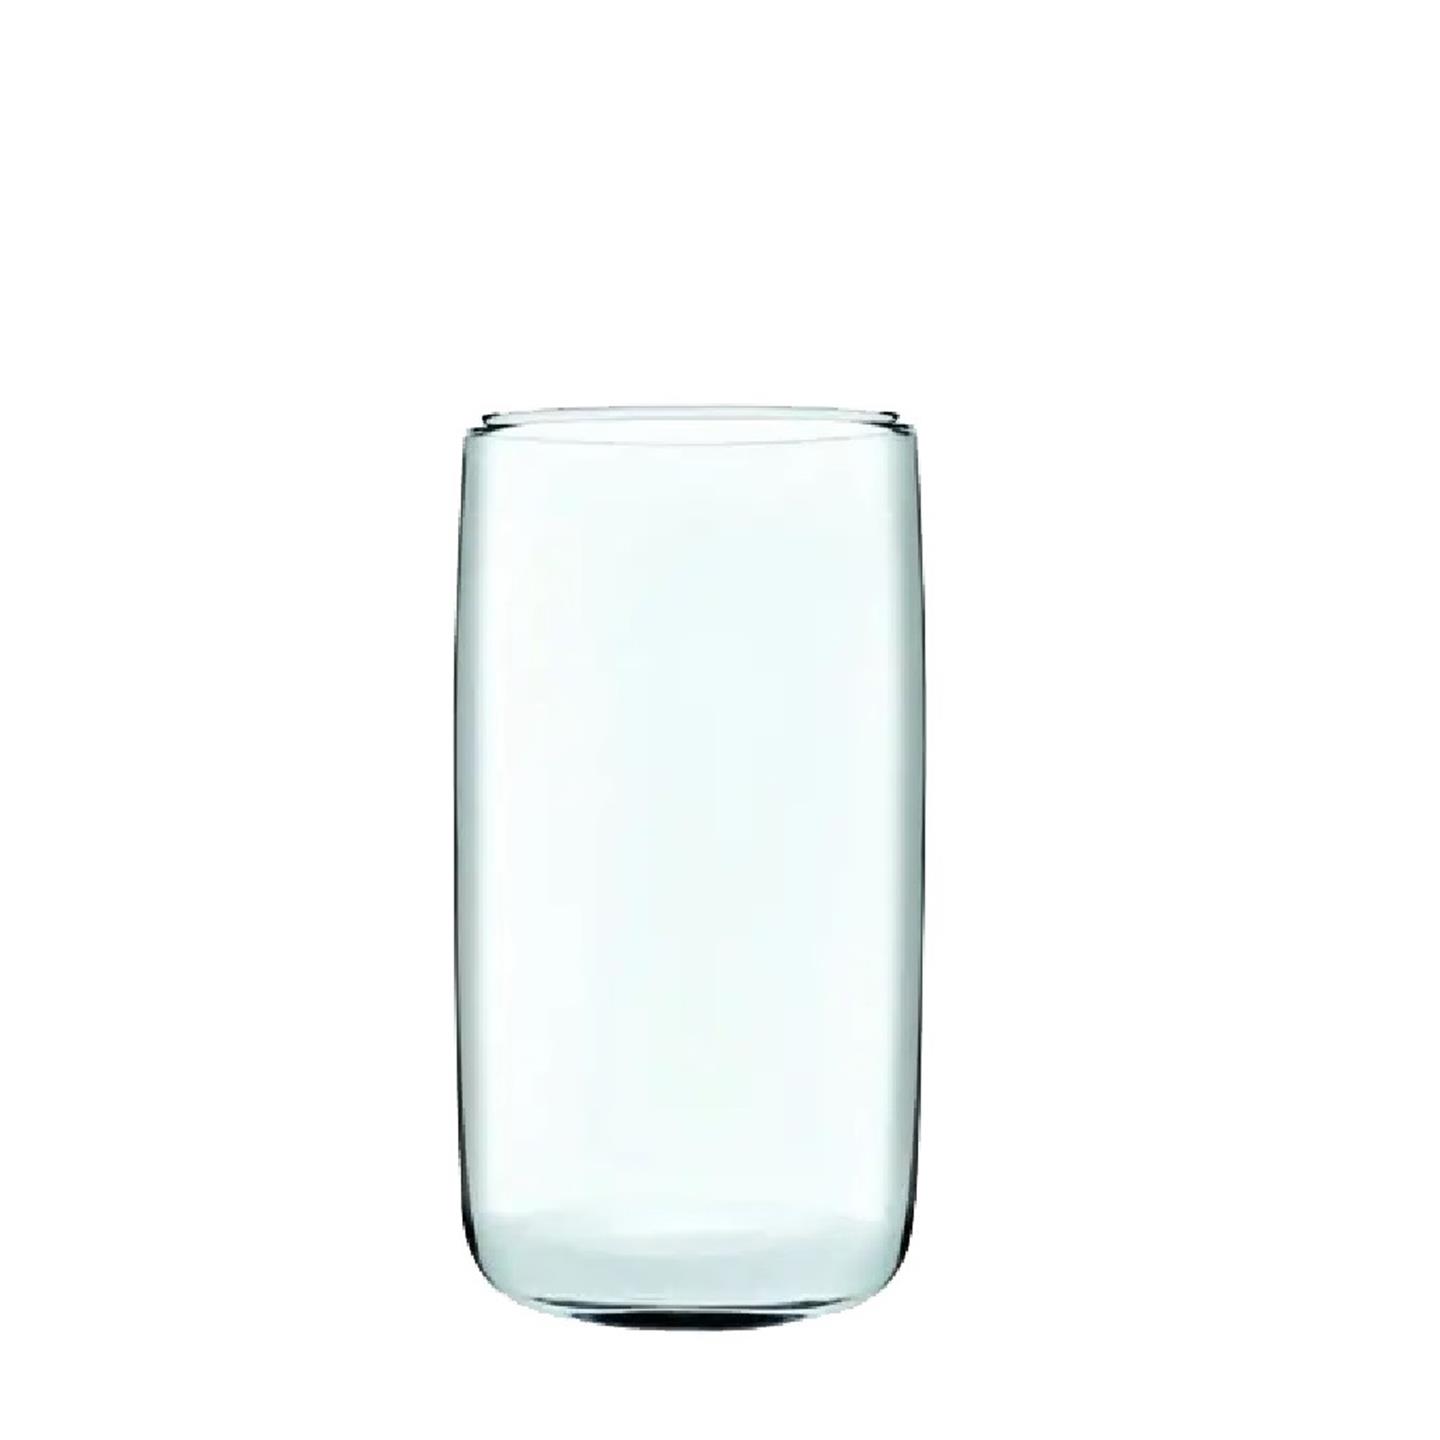 AWARE ICONIC LD 365ML MADE OF REC. GLASS H:12,9 D:6,7CM P/1248 GB4.OB24